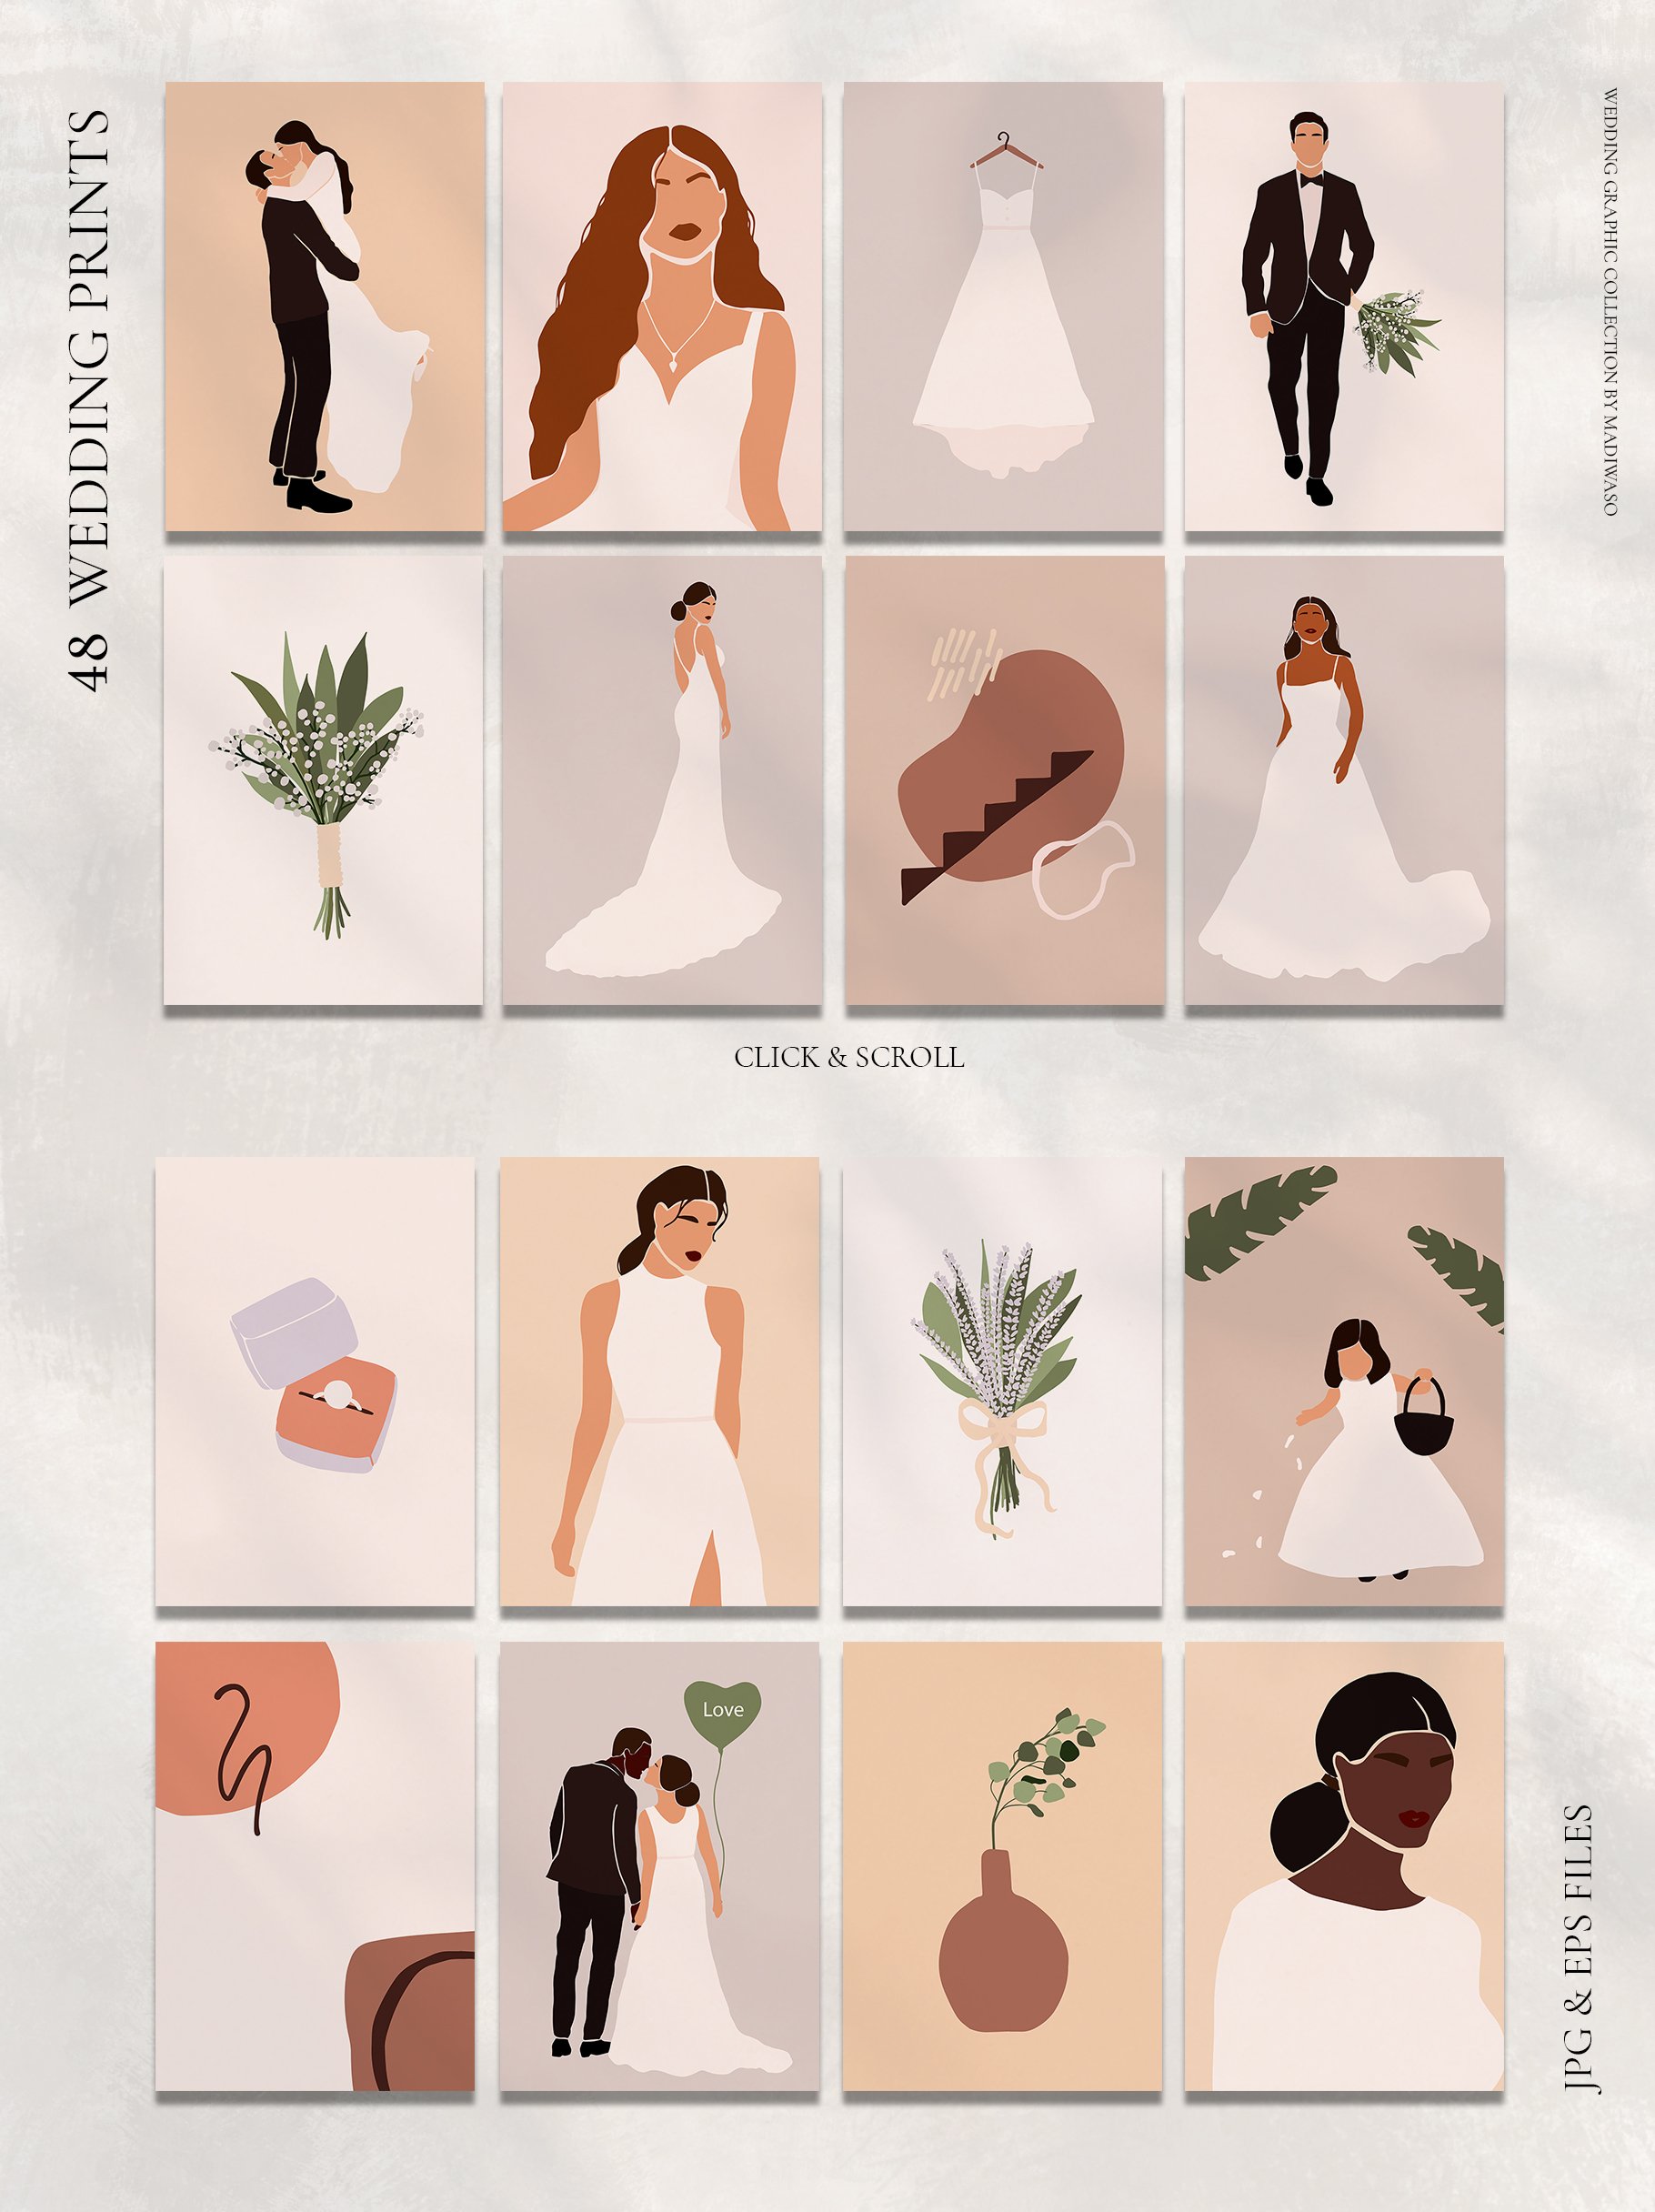 Wedding Abstract Graphic Collection